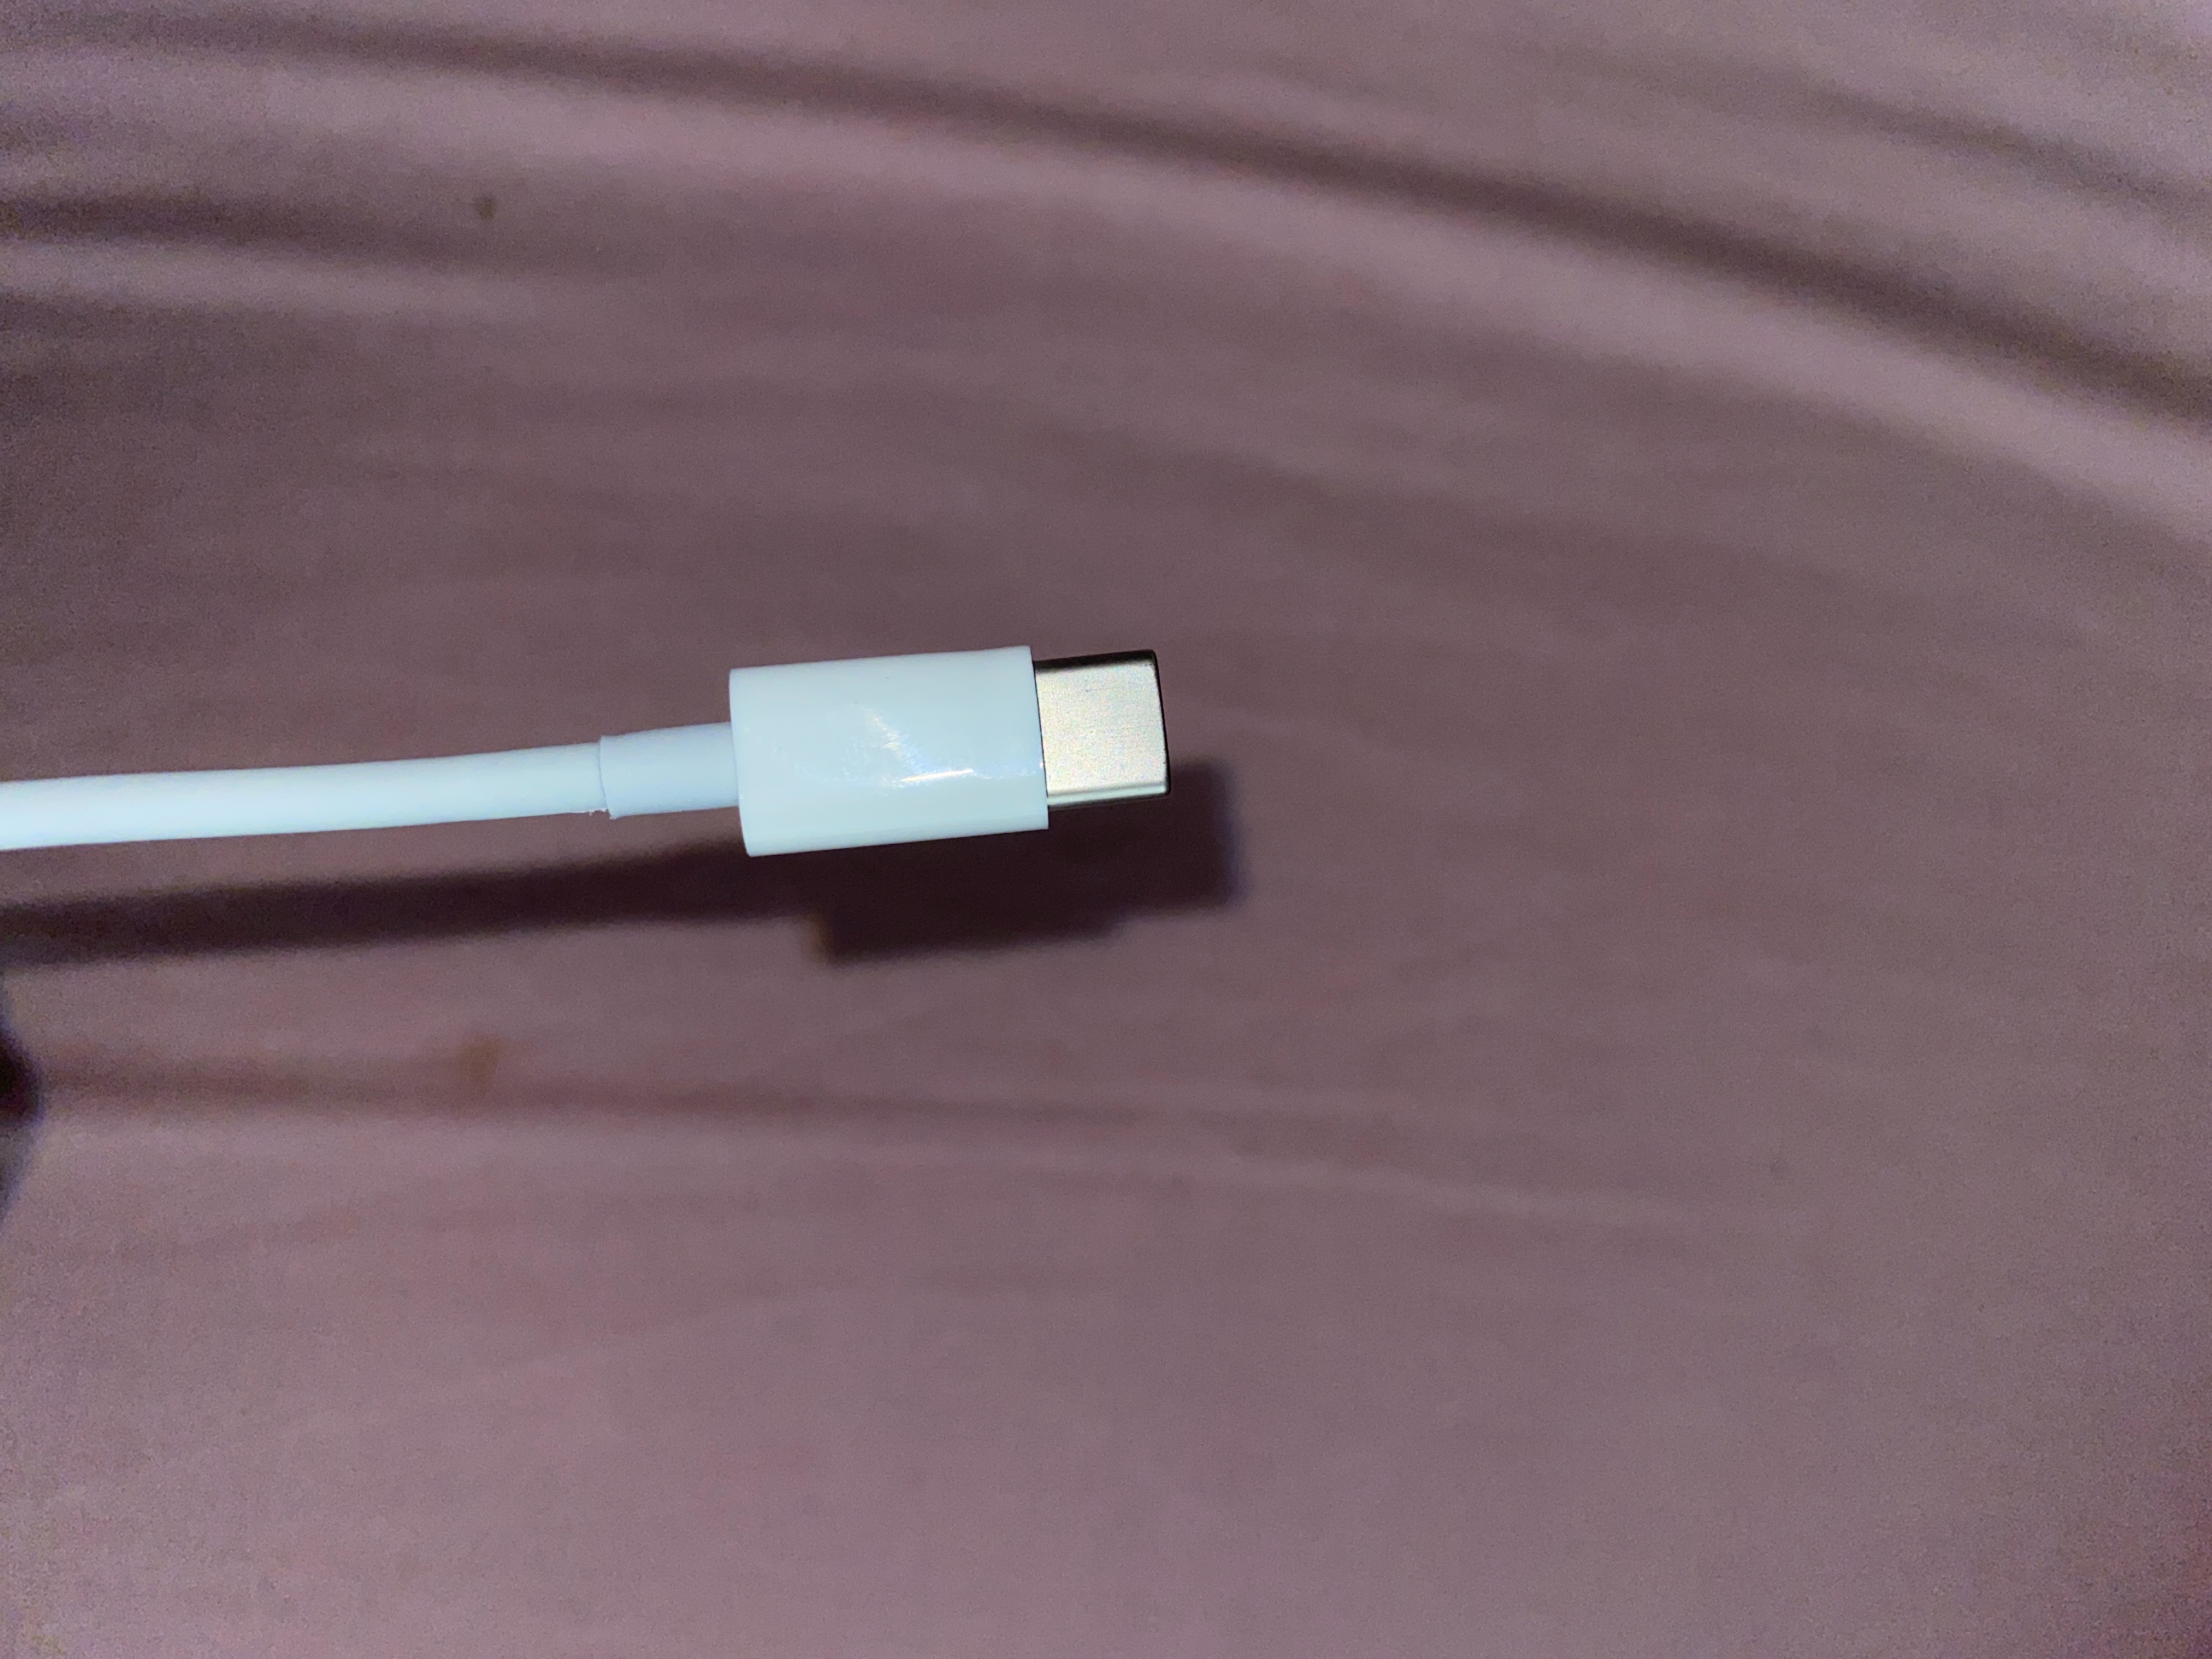 Fake vs Real Cable USB - C Lightning For iPhone iPad Apple 